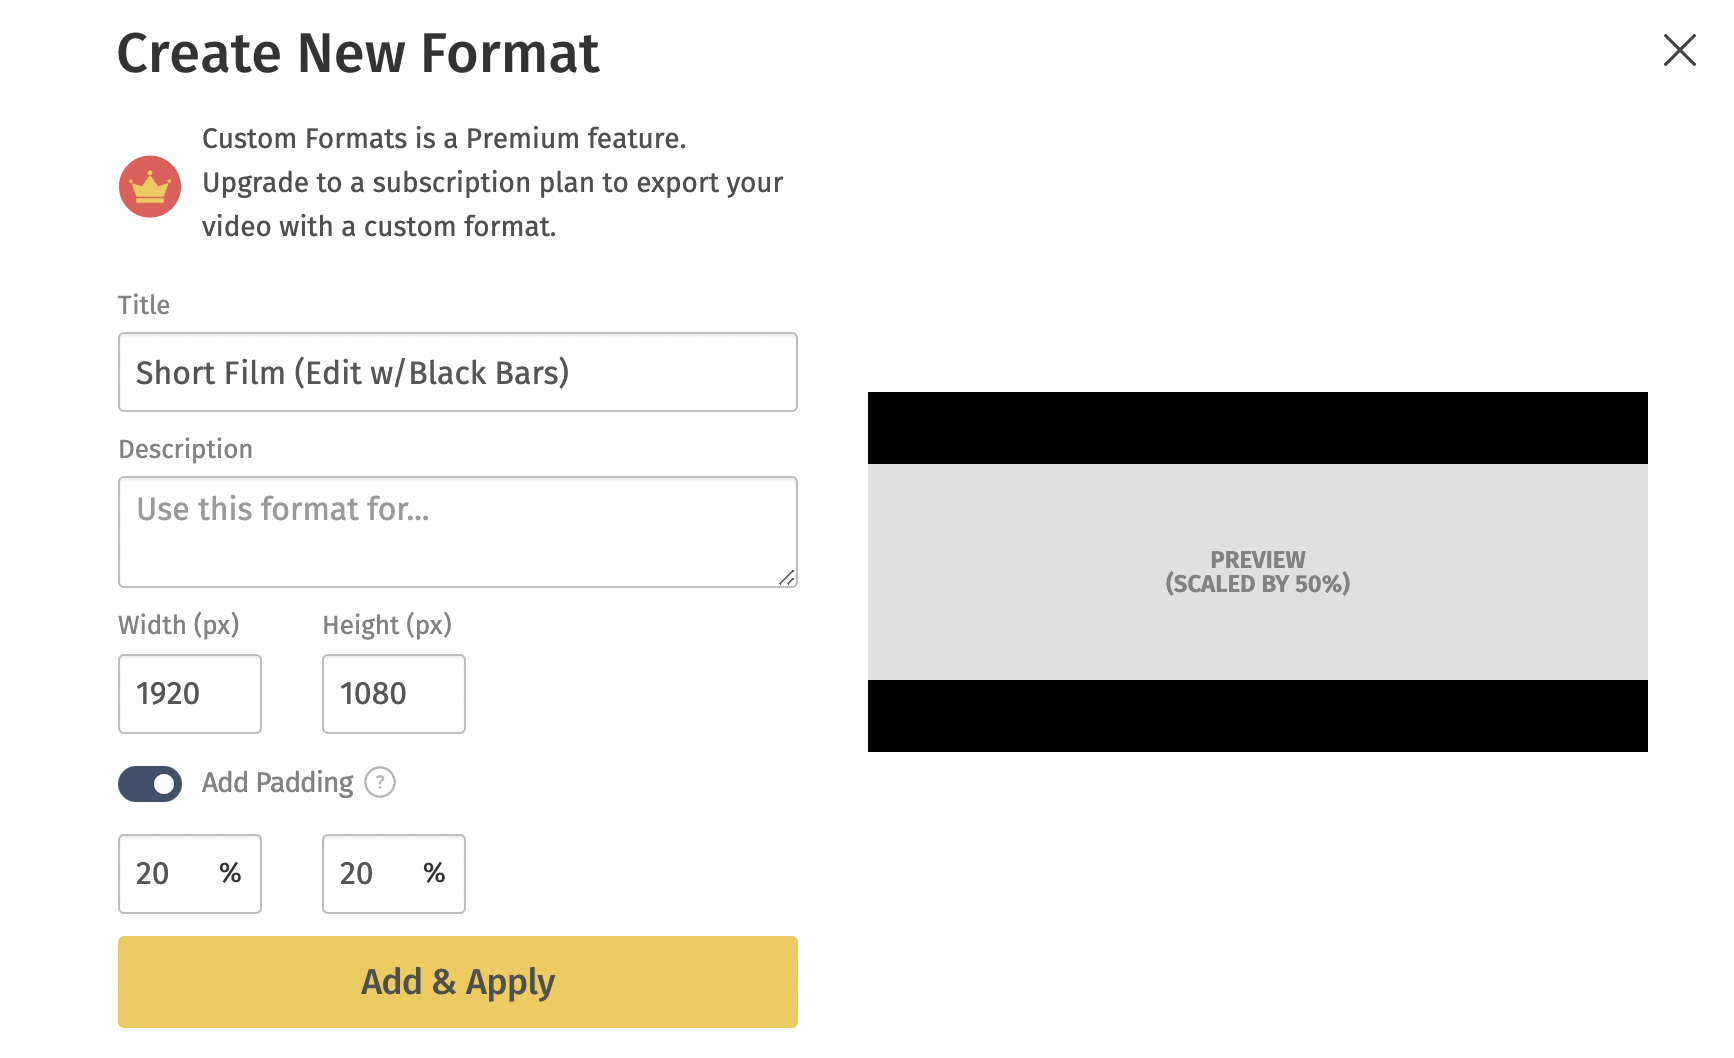 Landing page of Create a new format.